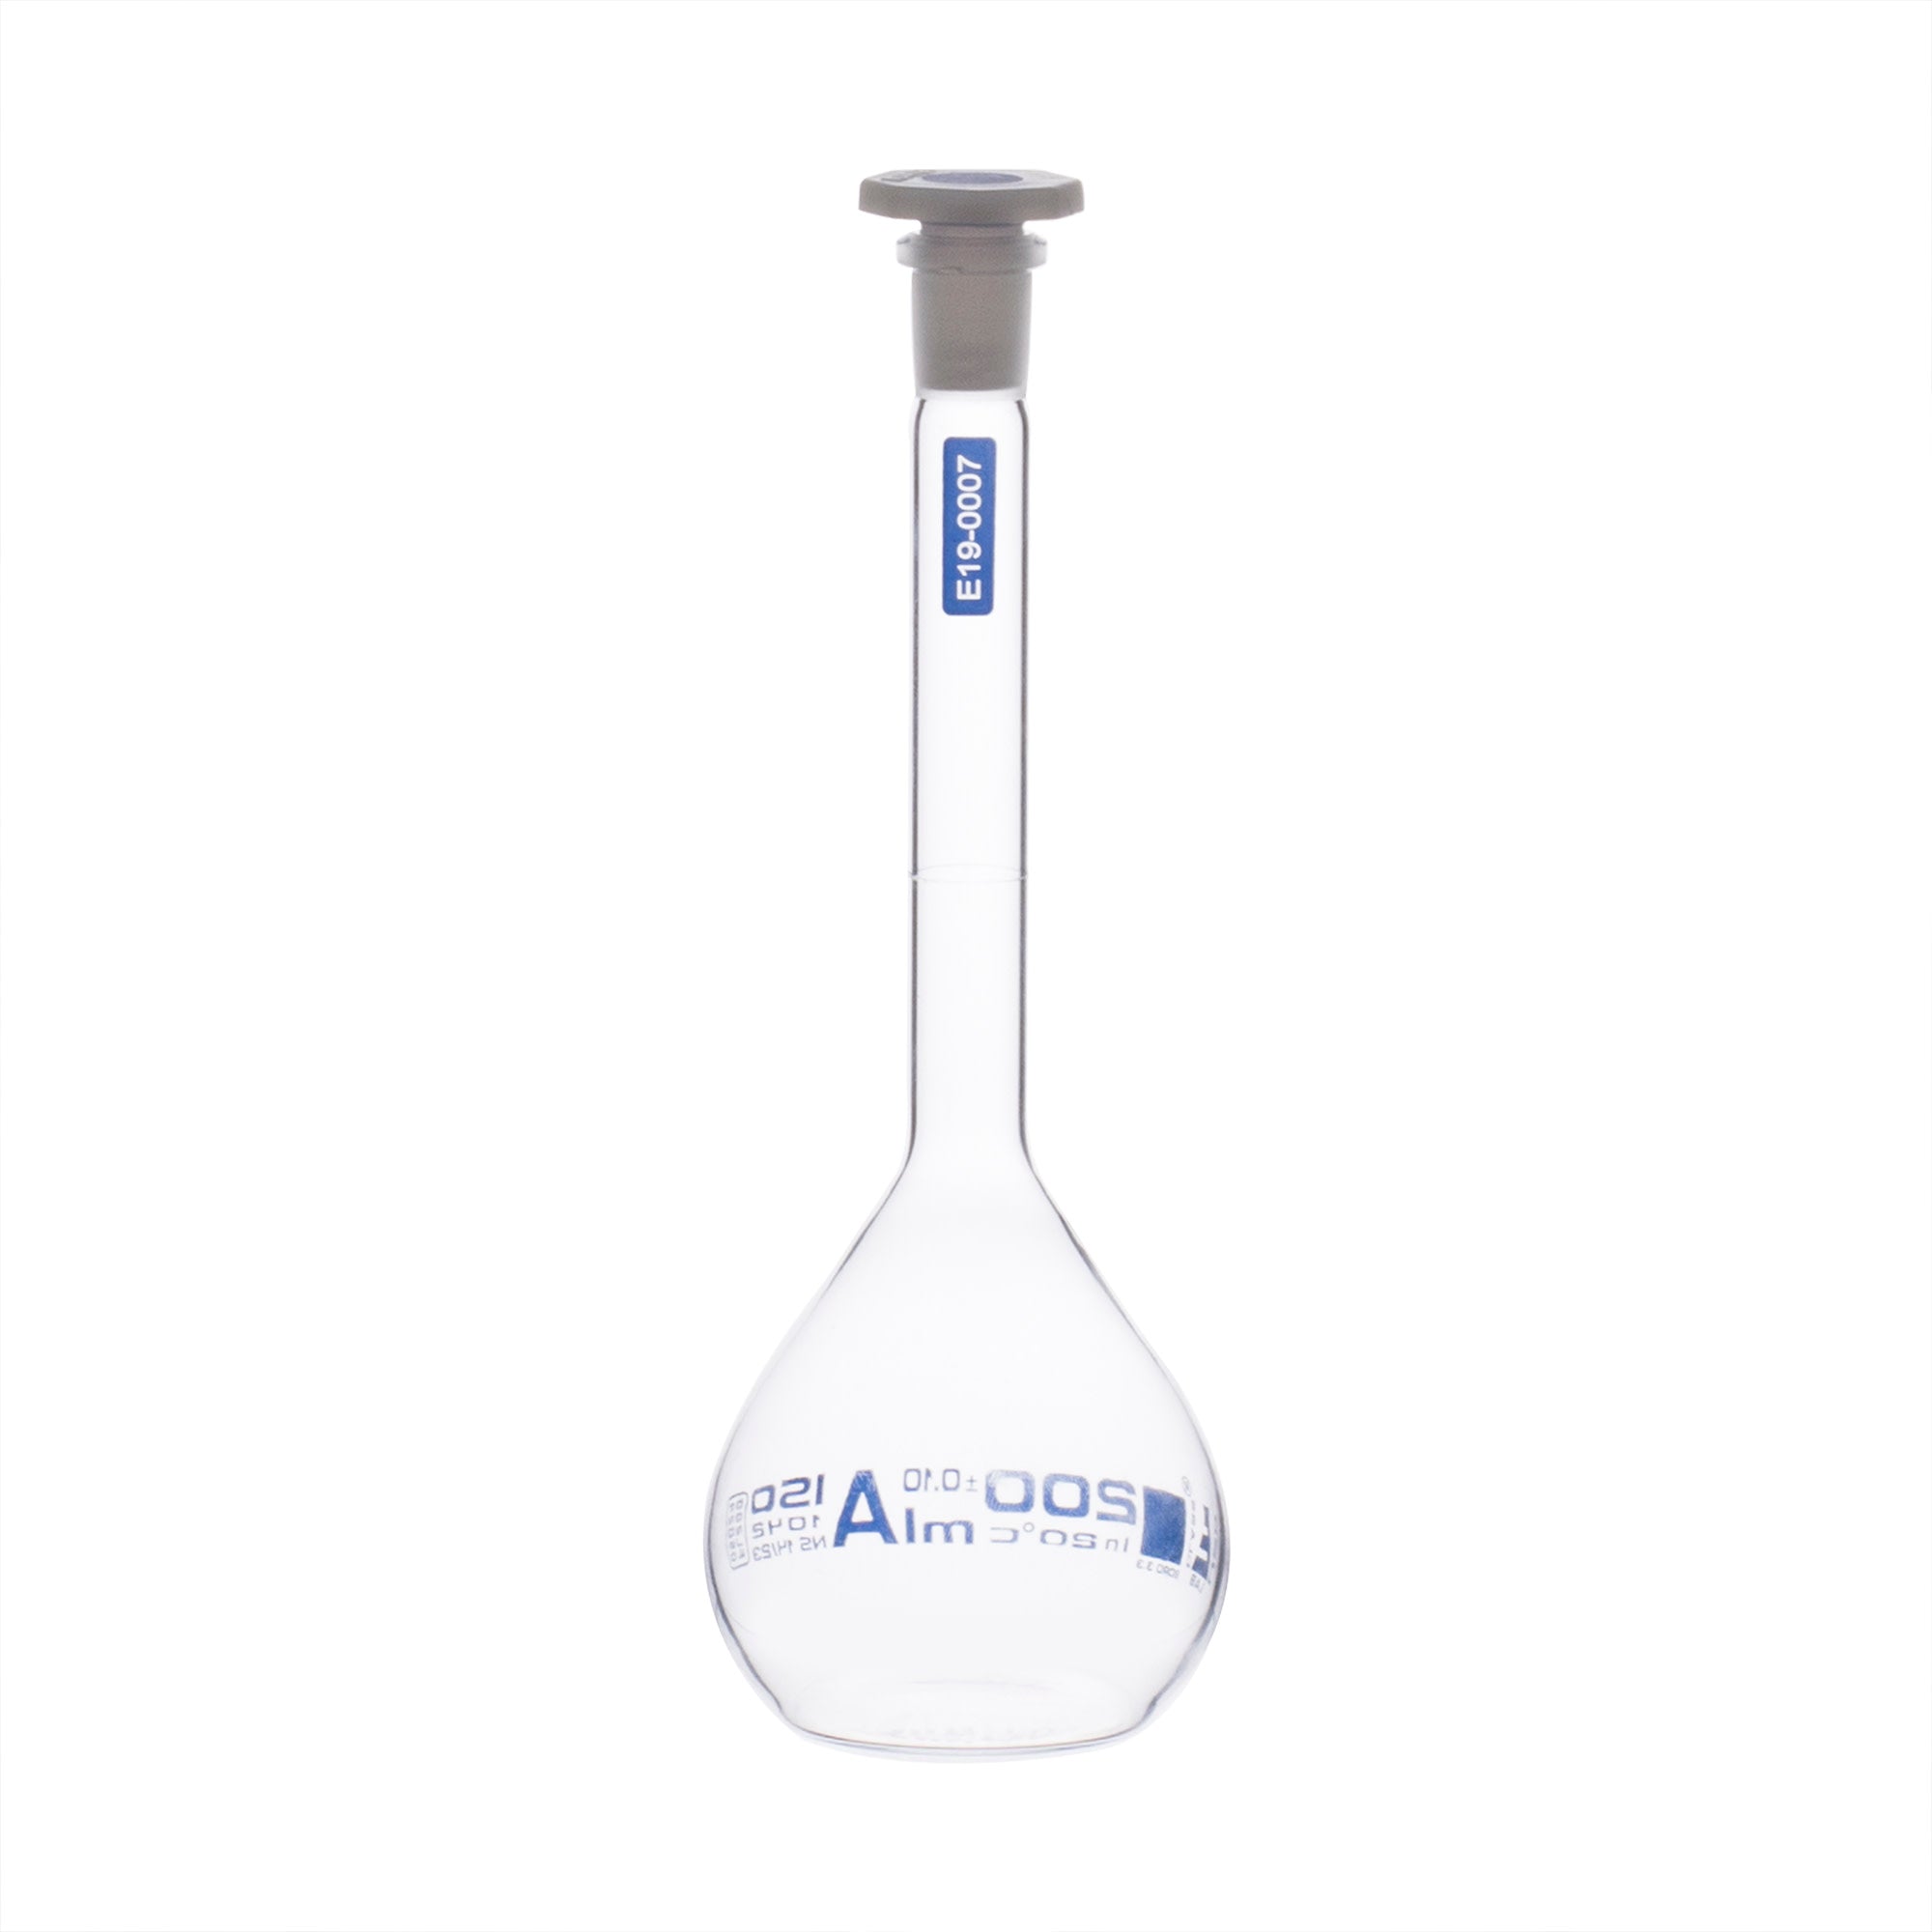 Borosilicate Glass Volumetric Flask with Solid Glass Stopper, 200 ml, USP Class A with Individual Work Certificate,  Pack of 2, Autoclavable